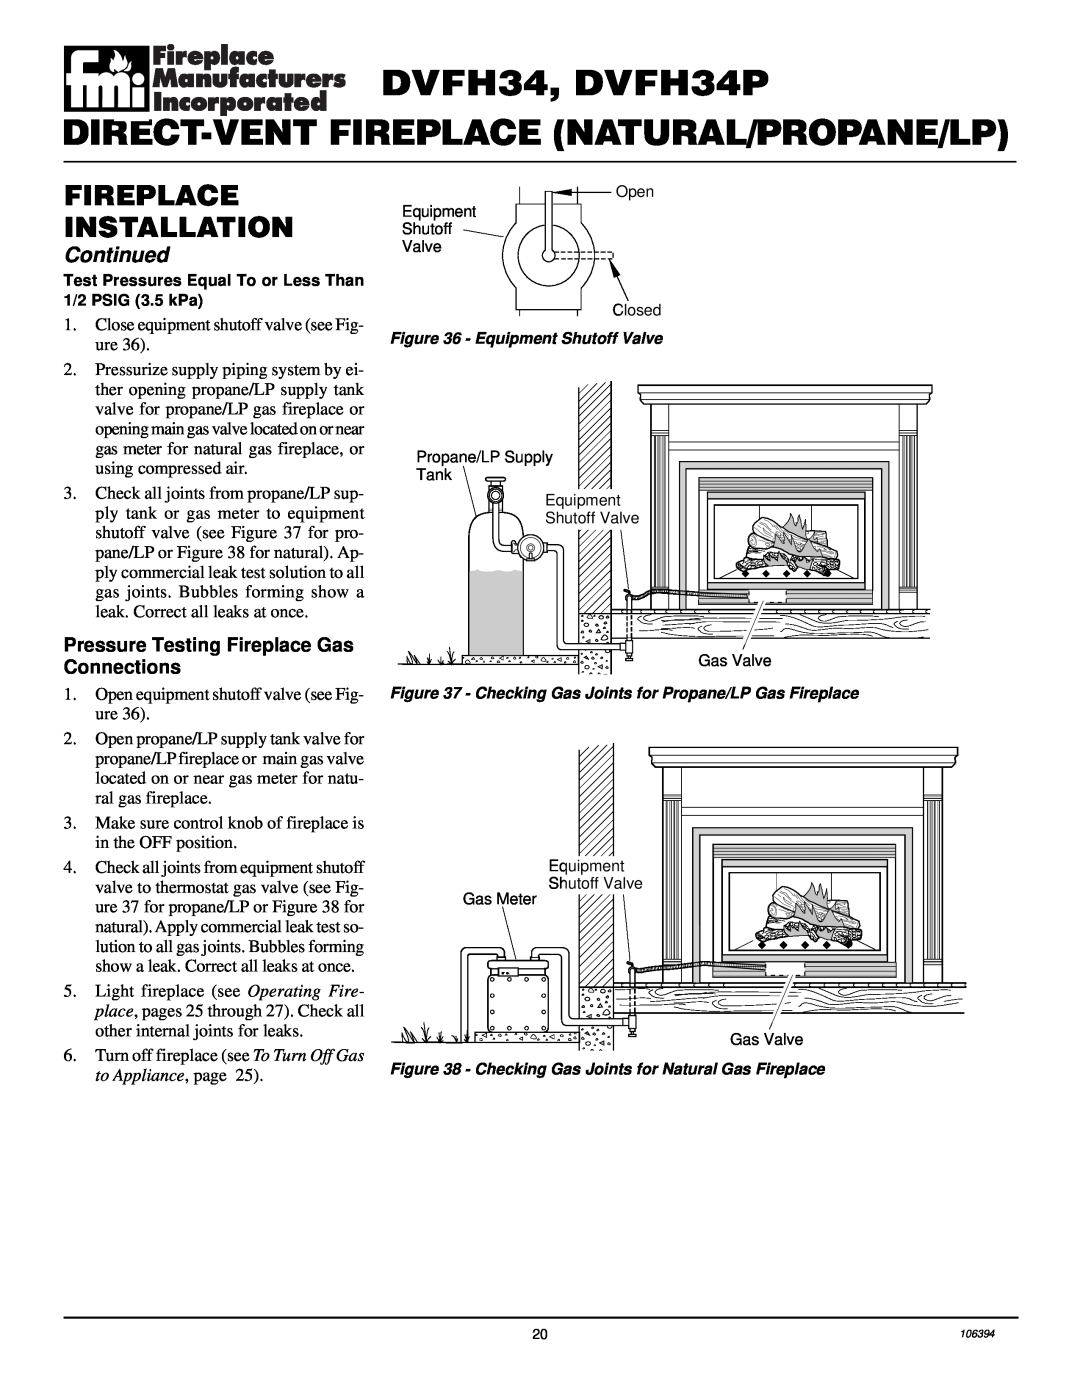 Desa installation manual DVFH34, DVFH34P, Direct-Ventfireplace Natural/Propane/Lp, Fireplace Installation, Continued 